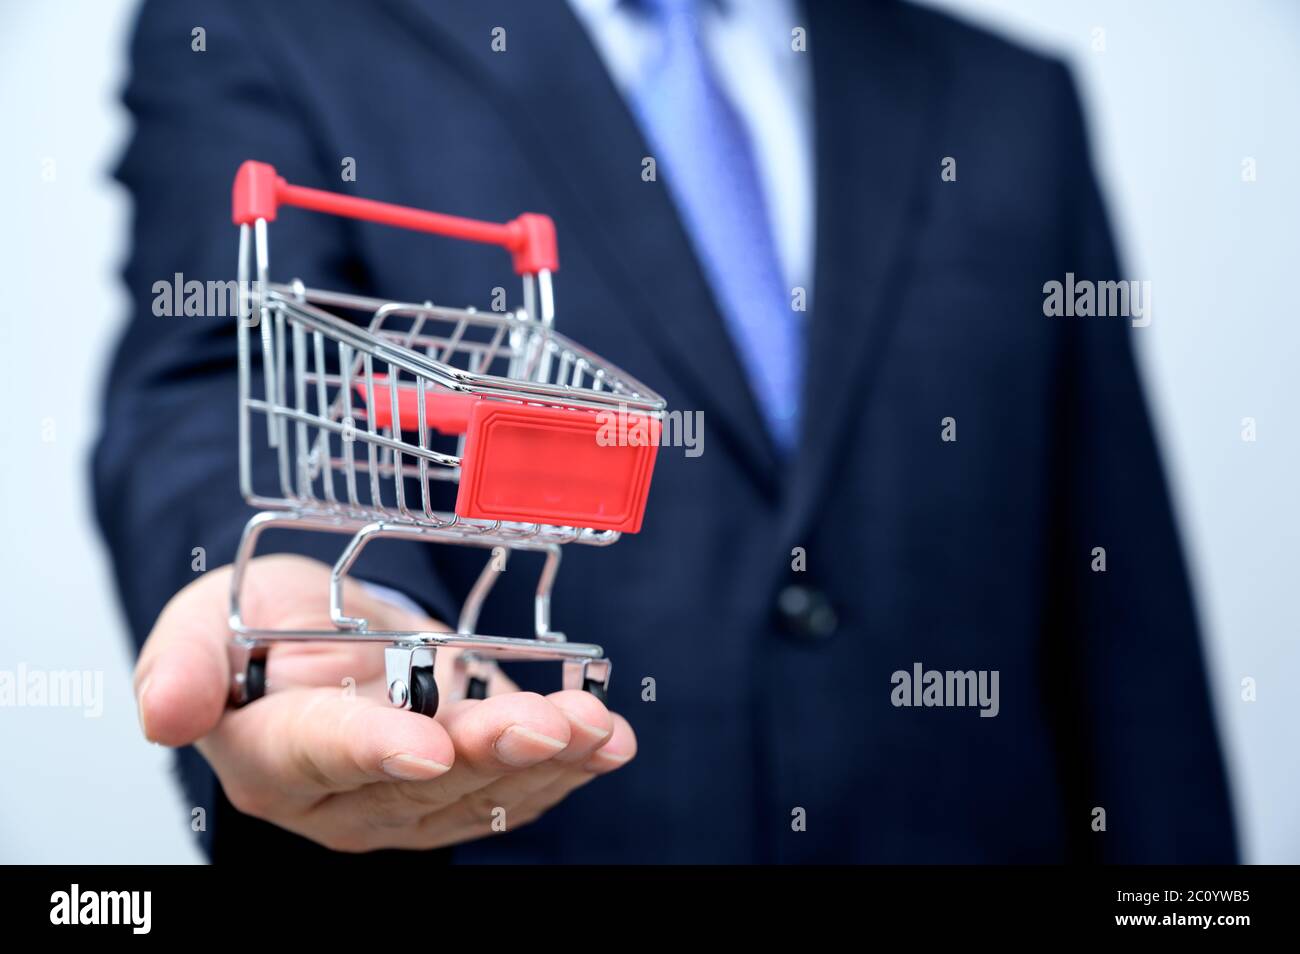 Man in suit holding small shopping trolley in hand. Close up. Business, commerce and shopping concept. Stock Photo